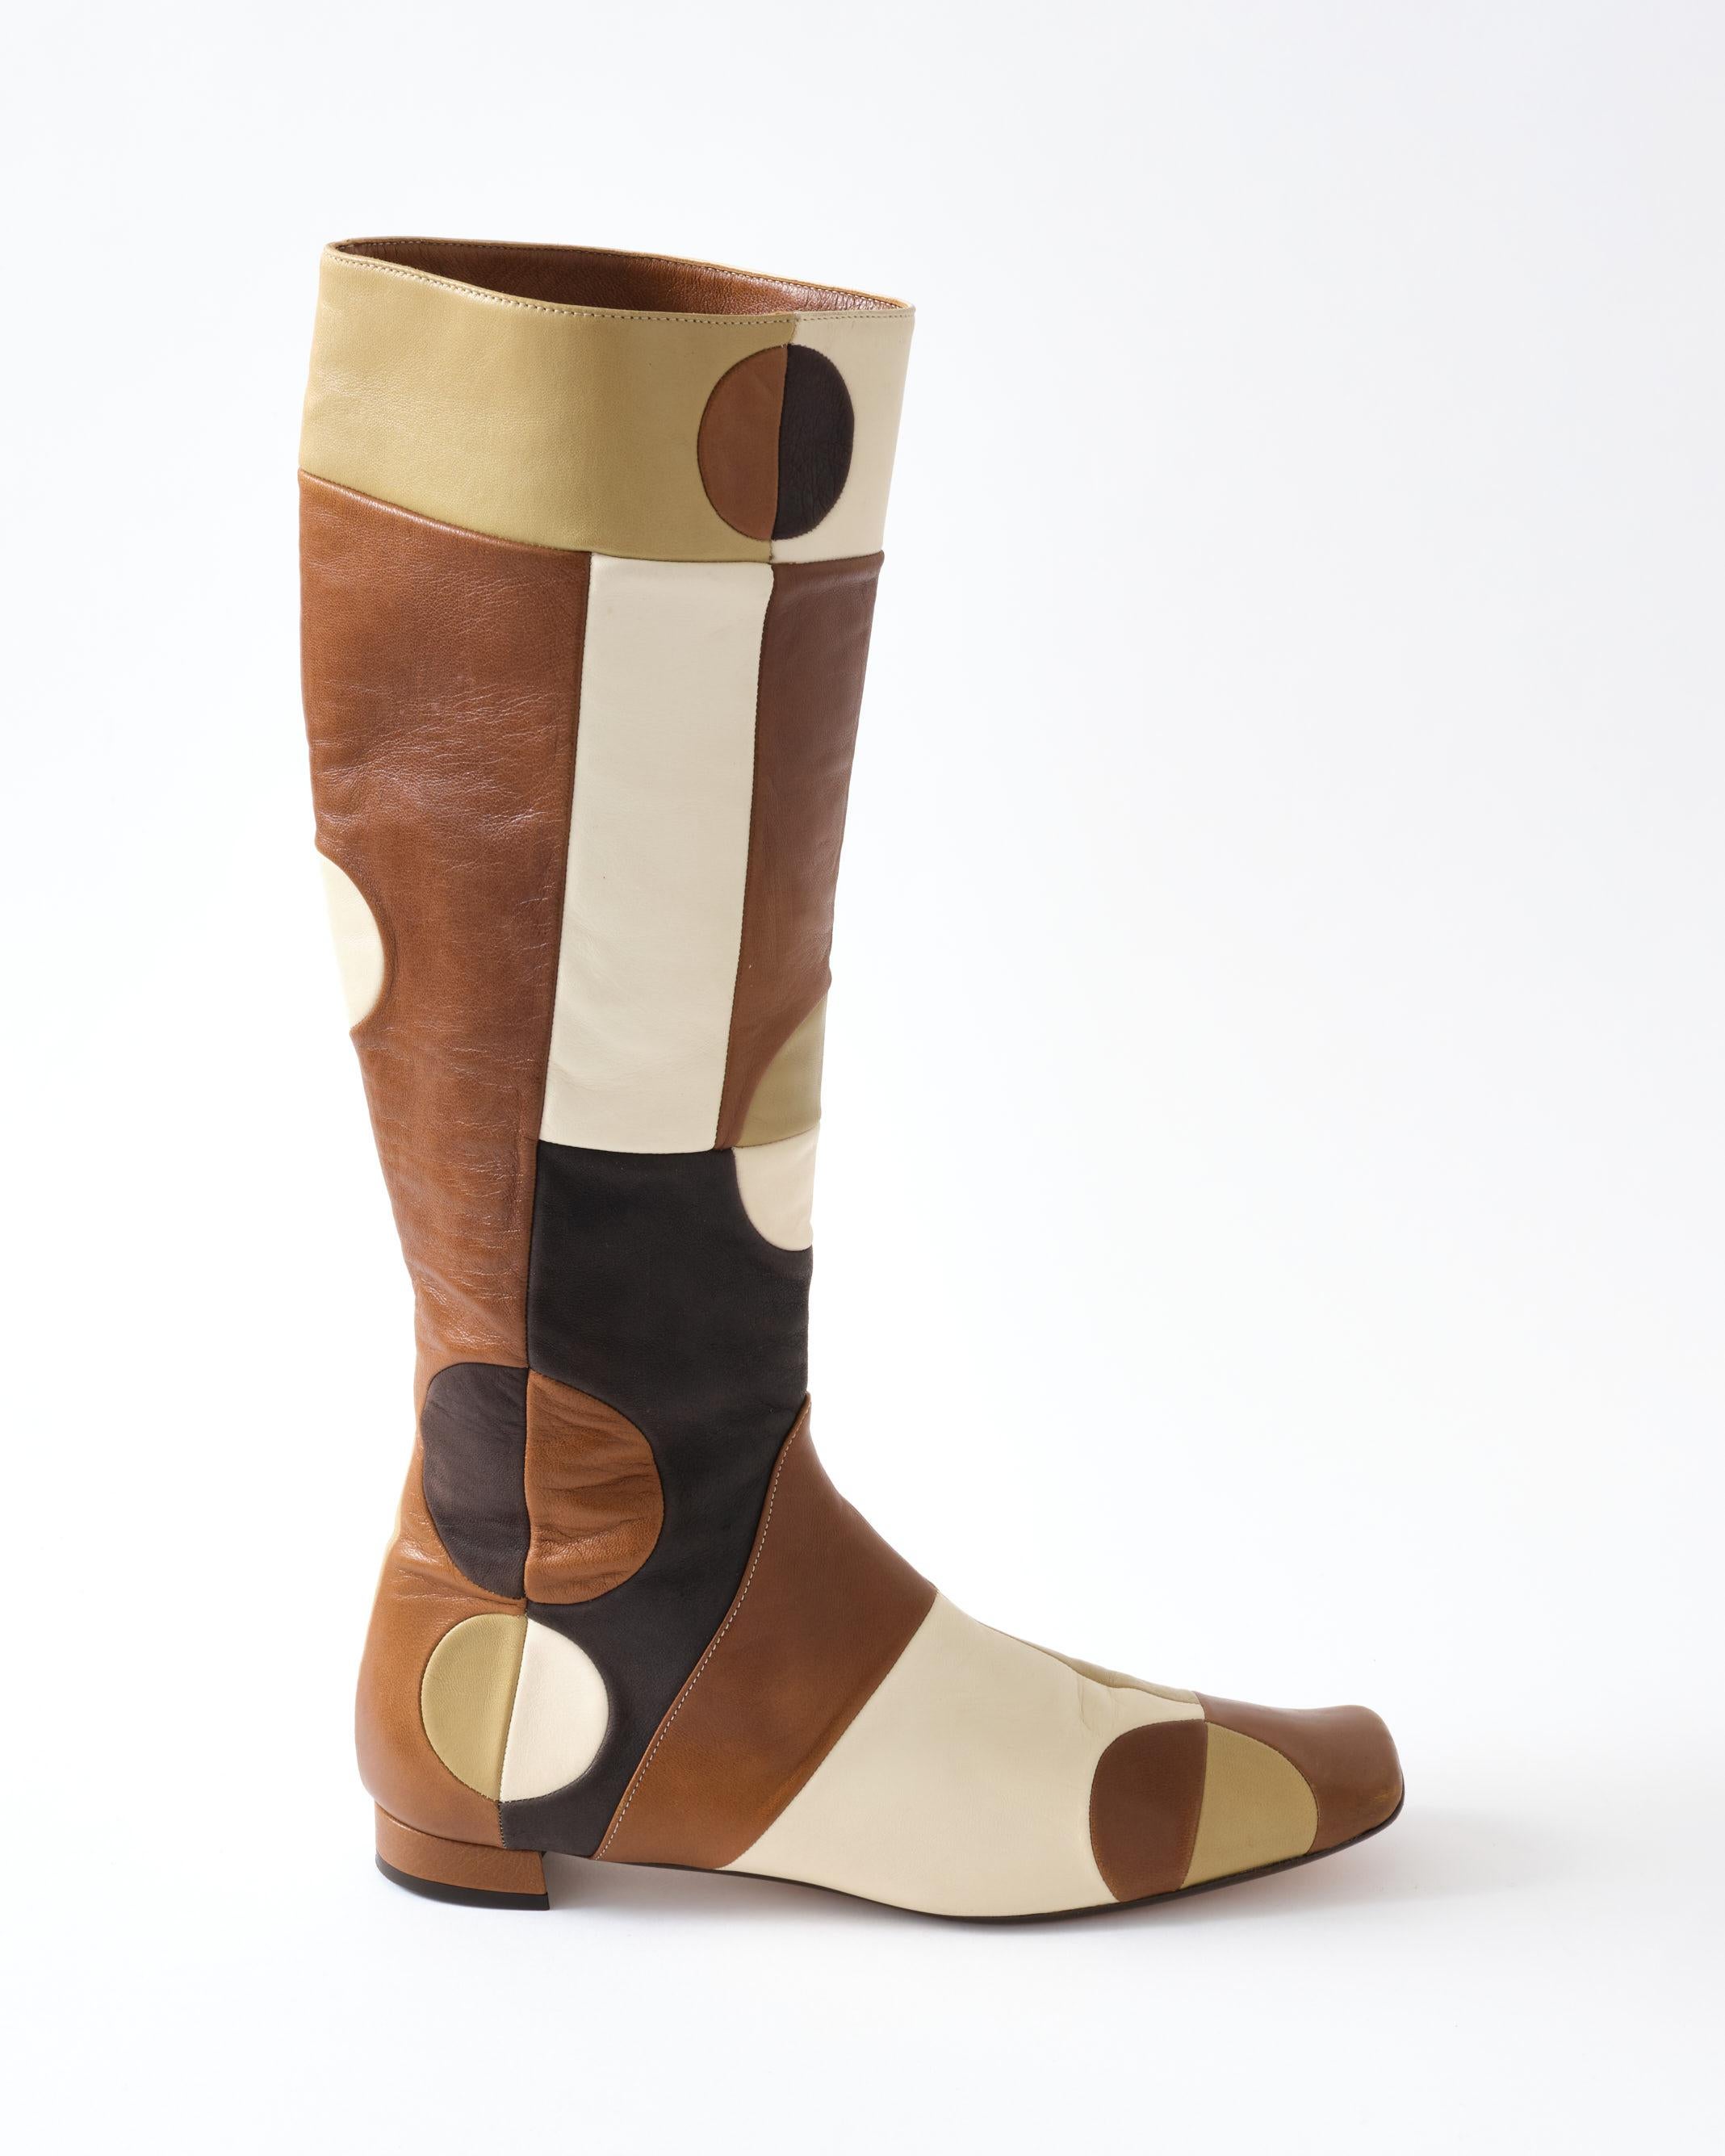 Marni Leather Boots, 1960's Style Design, Brown, Beige & Khaki, Pair of Boots For Sale 2